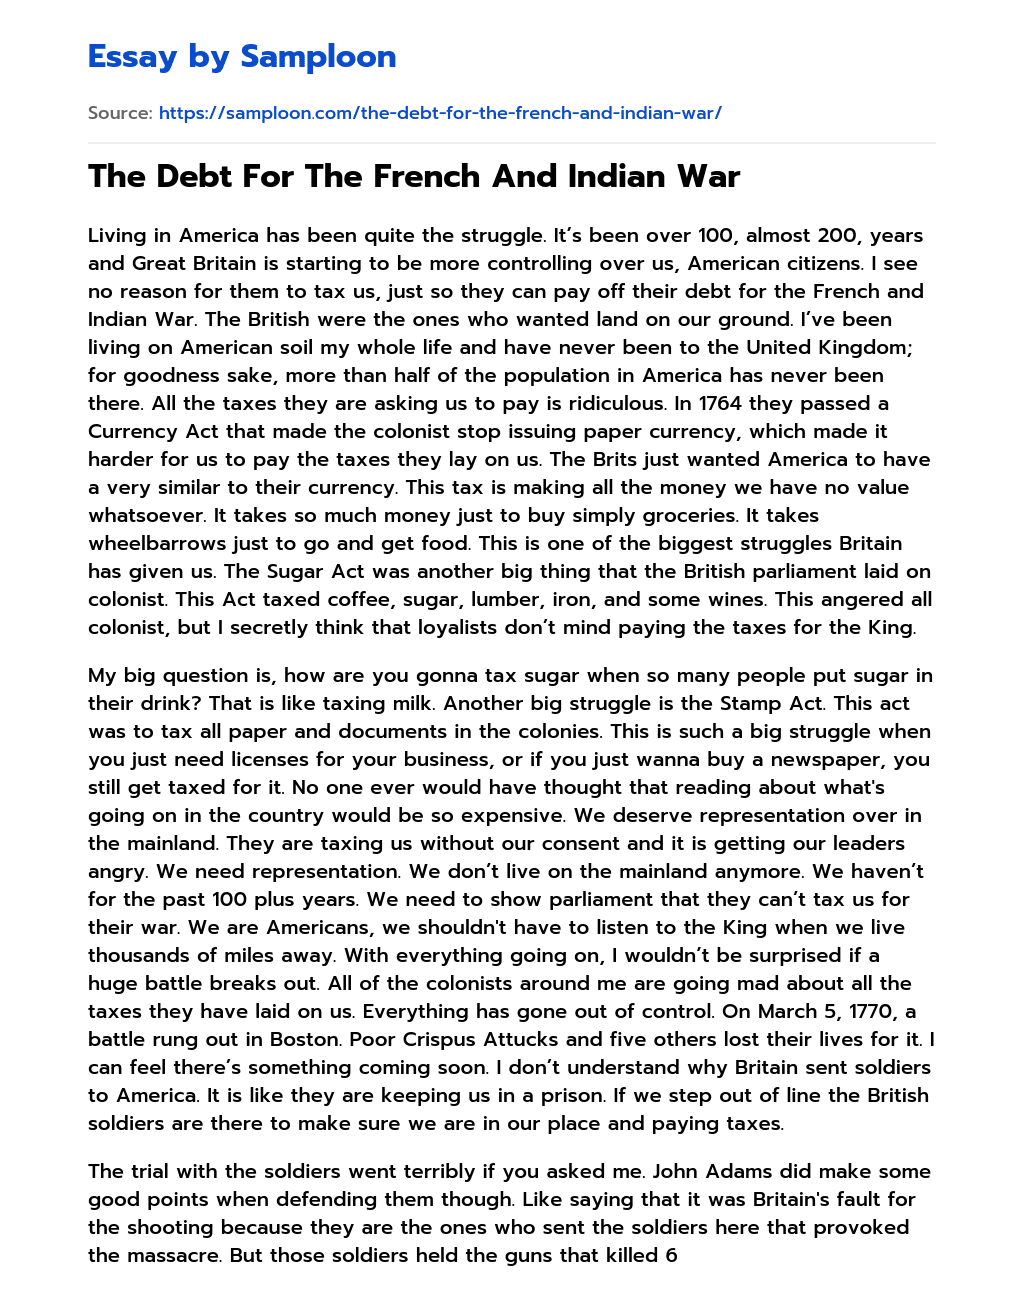 The Debt For The French And Indian War essay